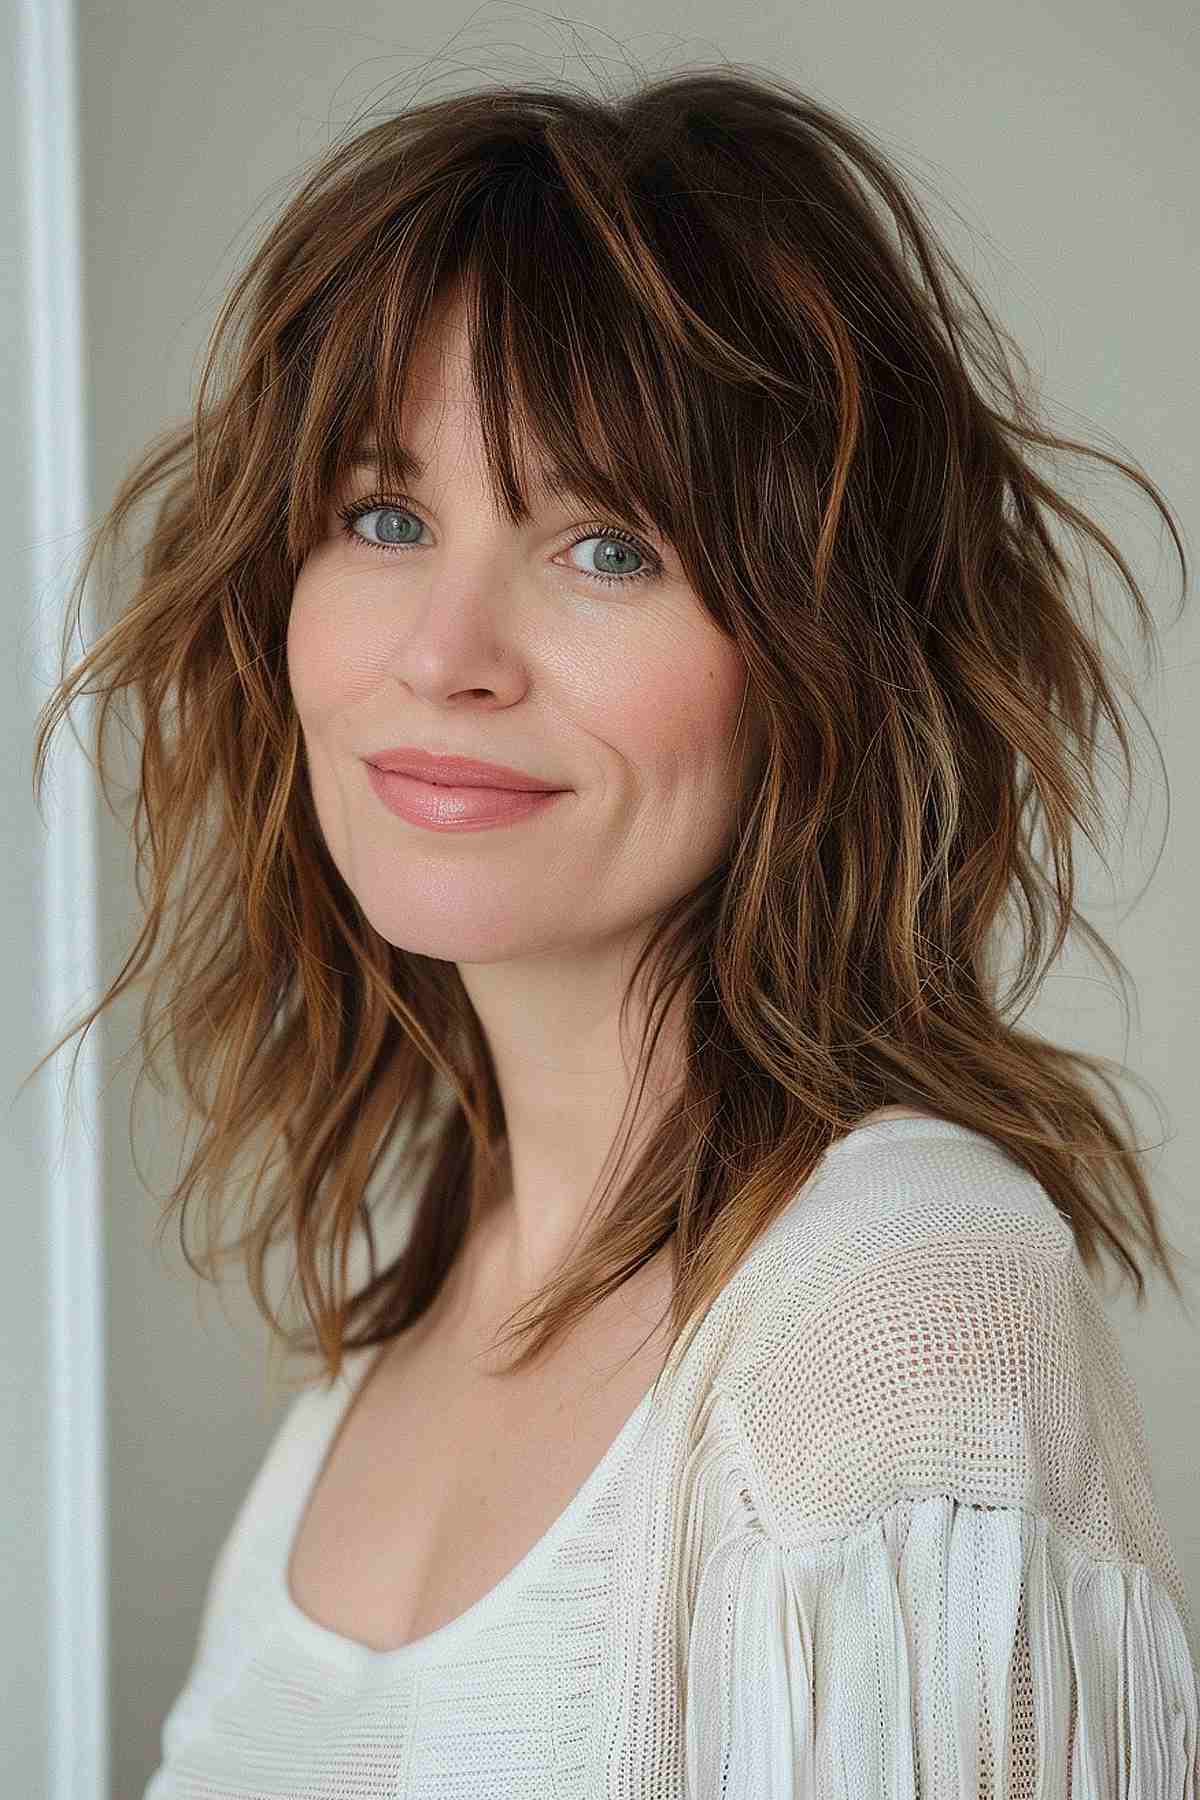 Woman with a messy and textured choppy cut, featuring shoulder-length layers and a soft fringe for a tousled, casual look